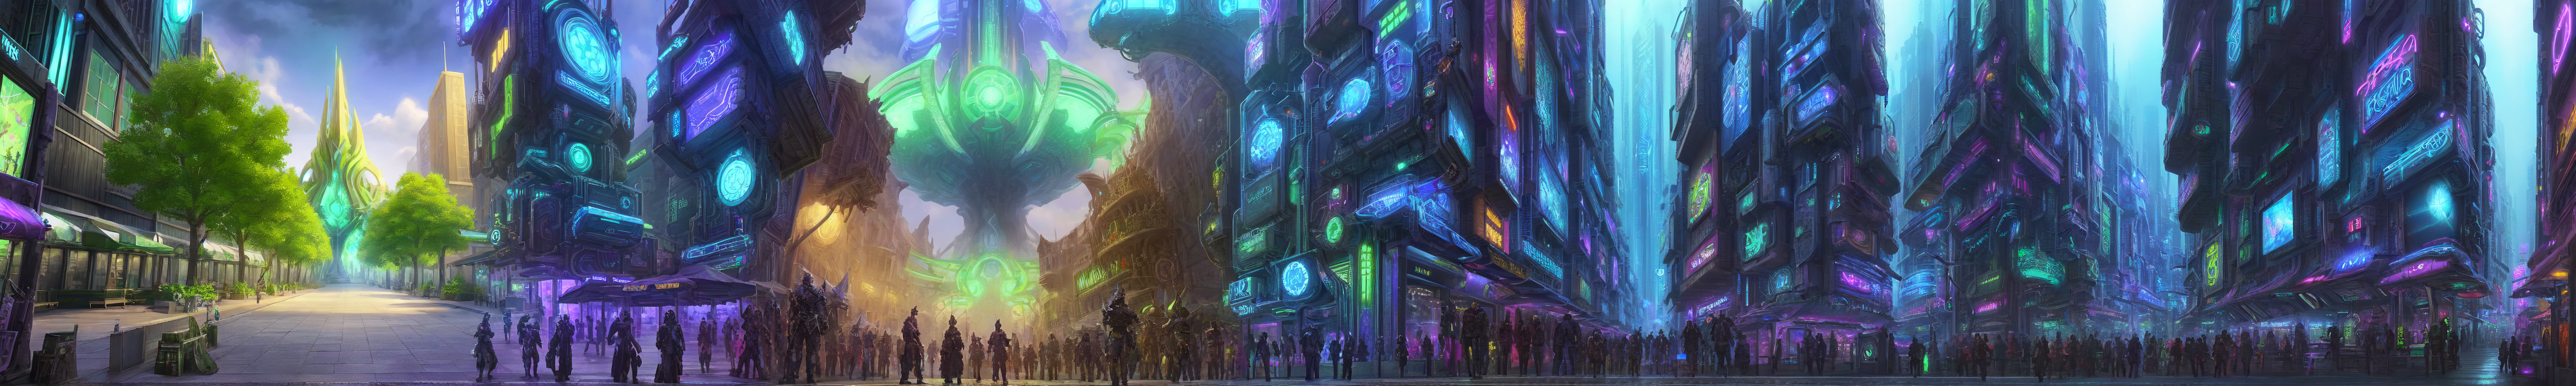 A header for ConceptMod showing a futuristic city.